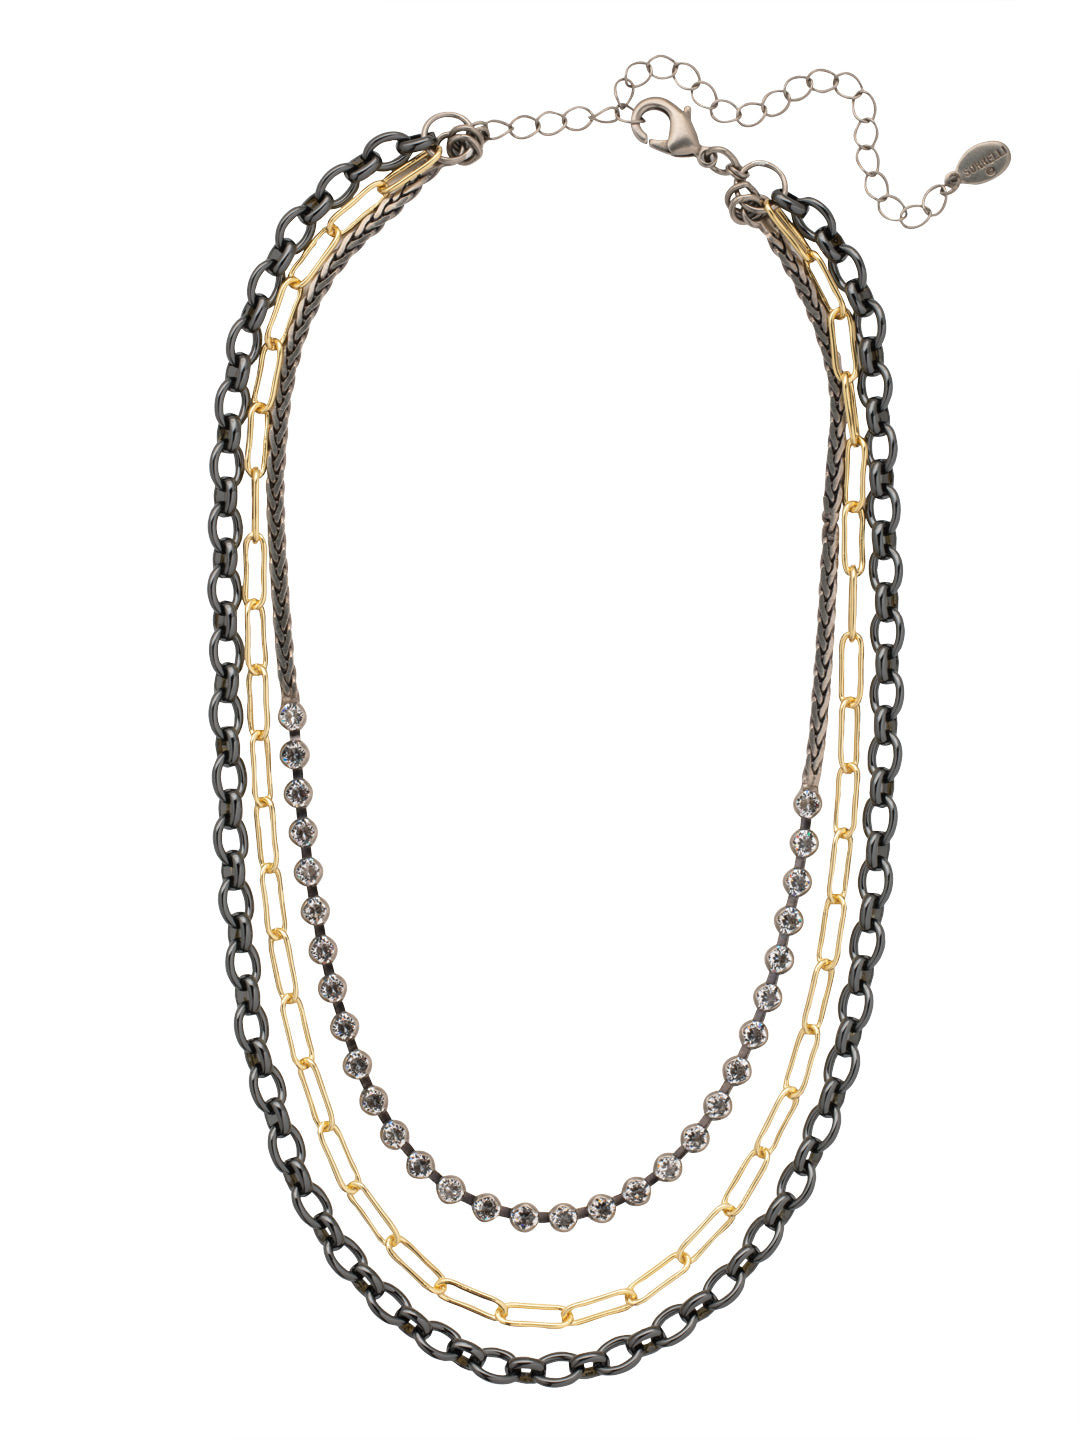 Necklet Triple Necklace Layering Clasp, White Gold